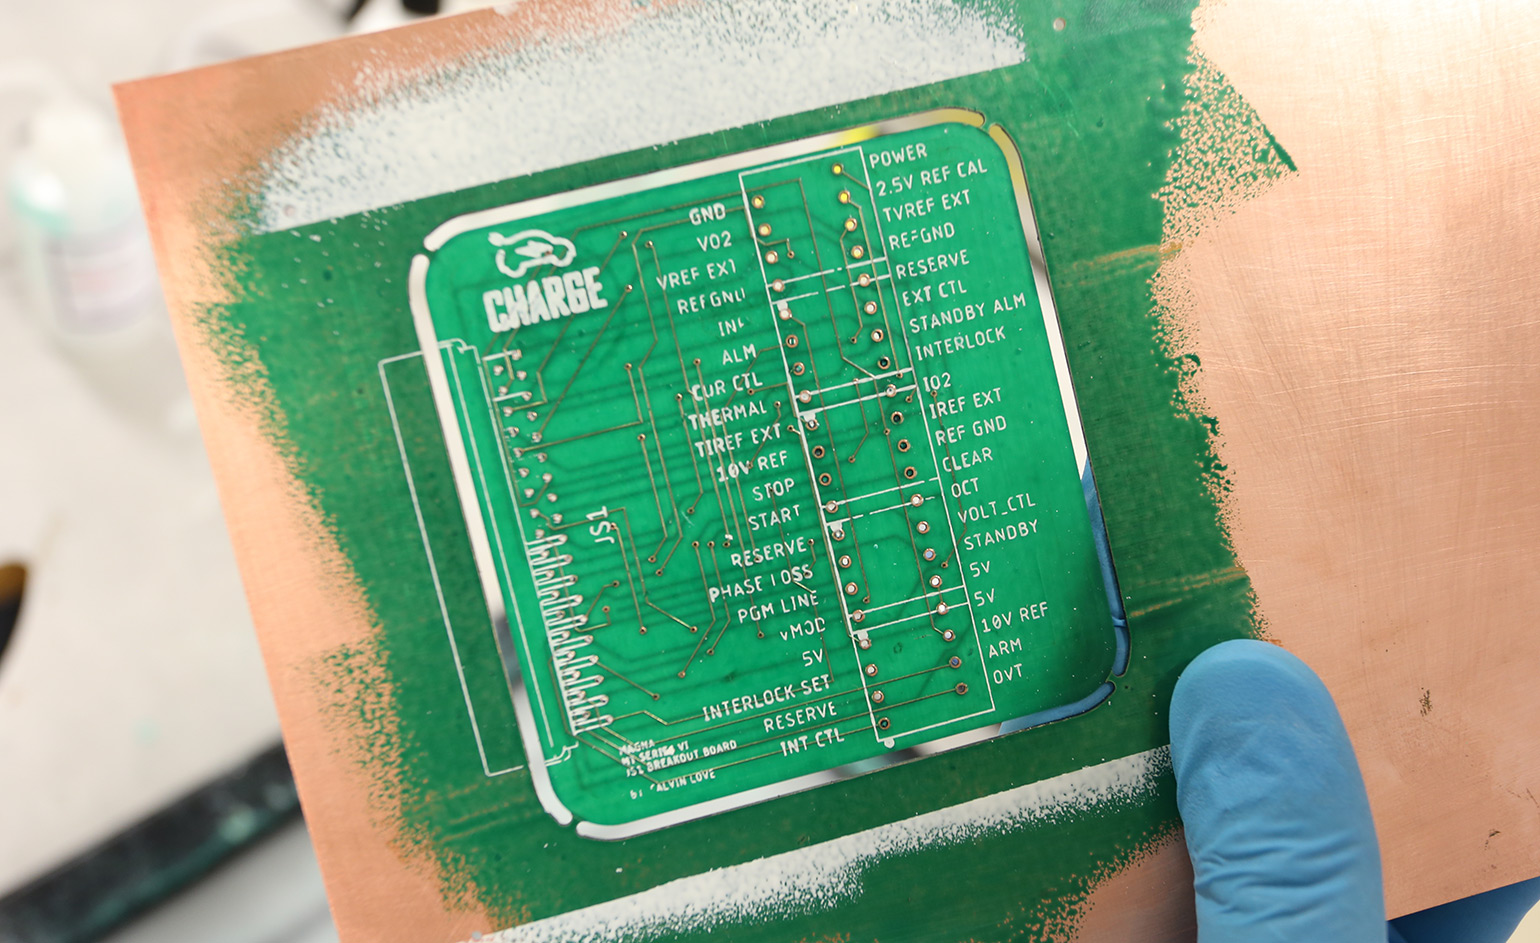 Close up view of printed circuit board